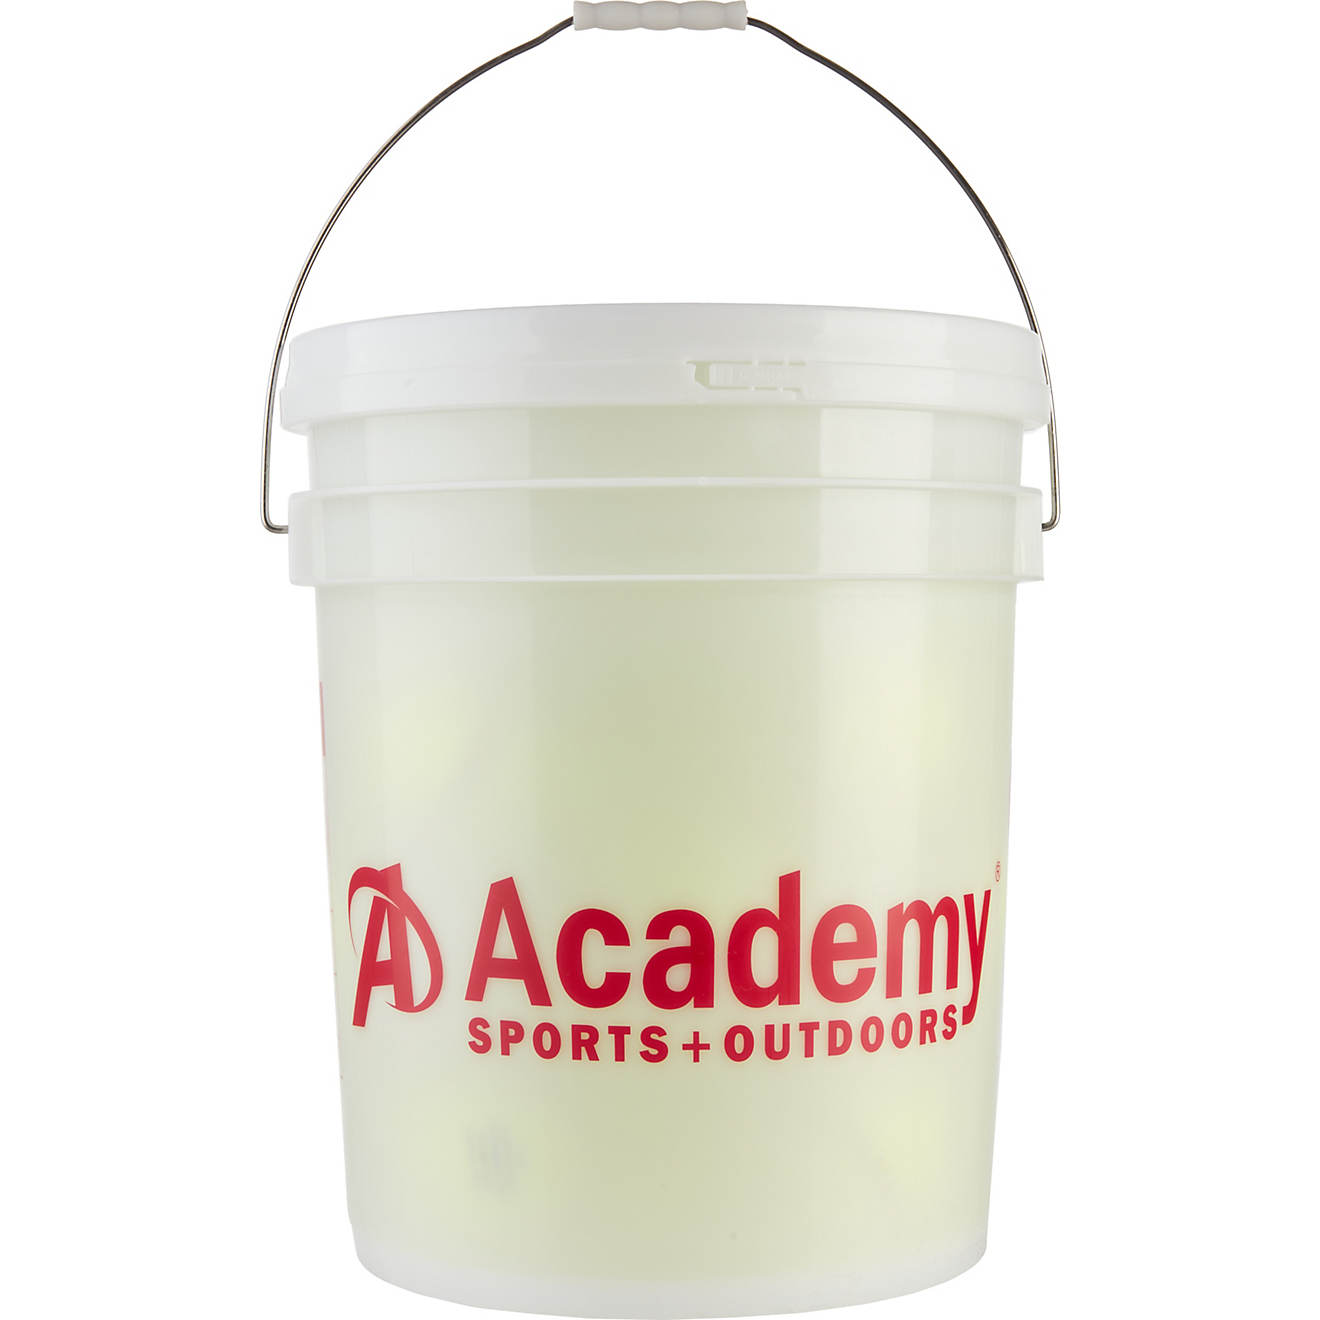 Academy Sports + Outdoors 12 in Fast-Pitch Practice Softballs 18-count Bucket                                                    - view number 1